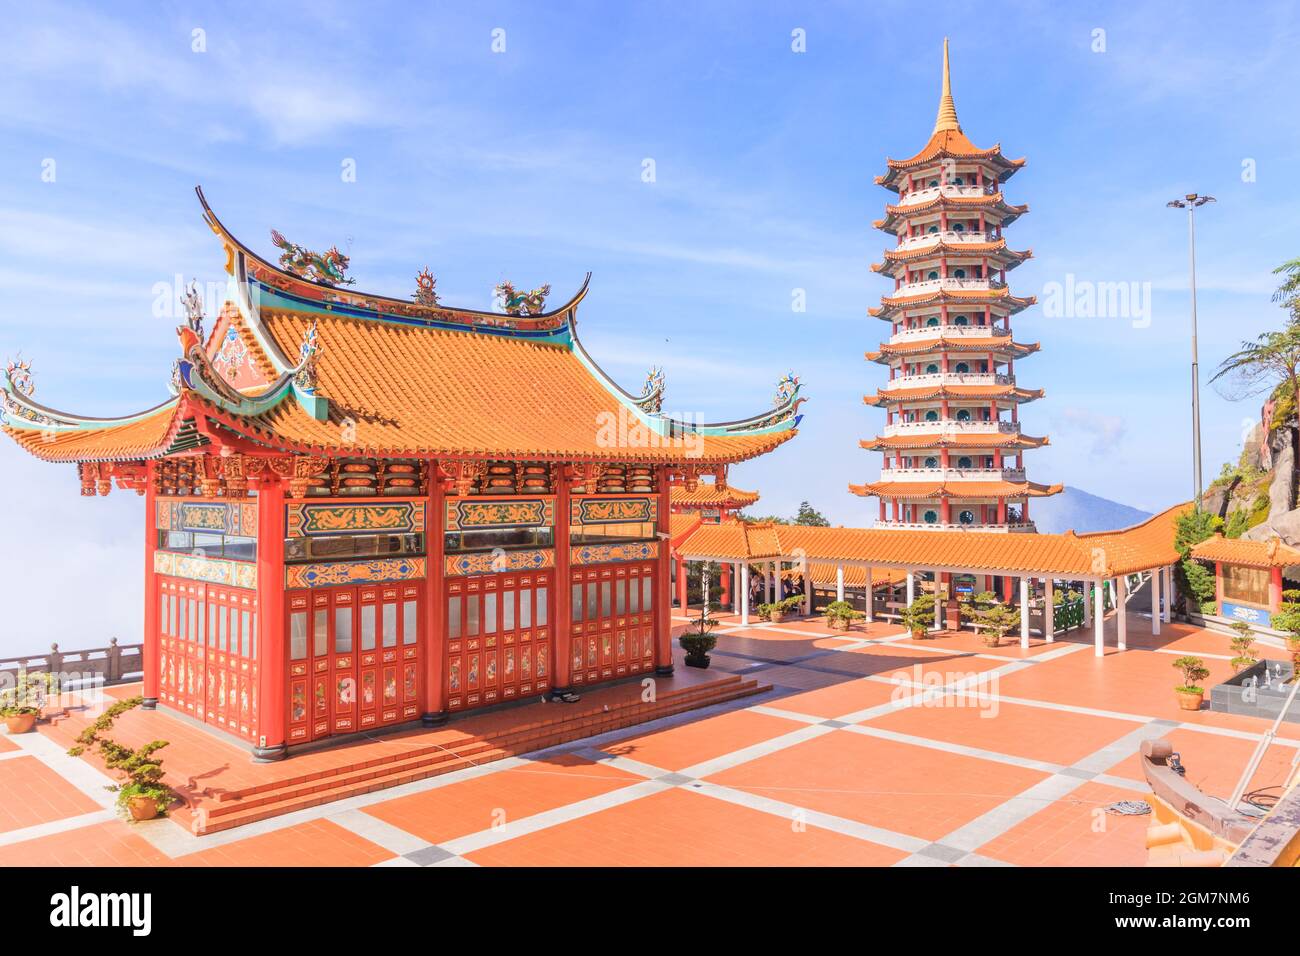 GENTING HIGHLAND, MALAYSIA - APRIL 16, 2017: Pagoda at Chin Swee Temple, Genting Highlands on April 16, 2017. Genting Highland is a famous tourist att Stock Photo